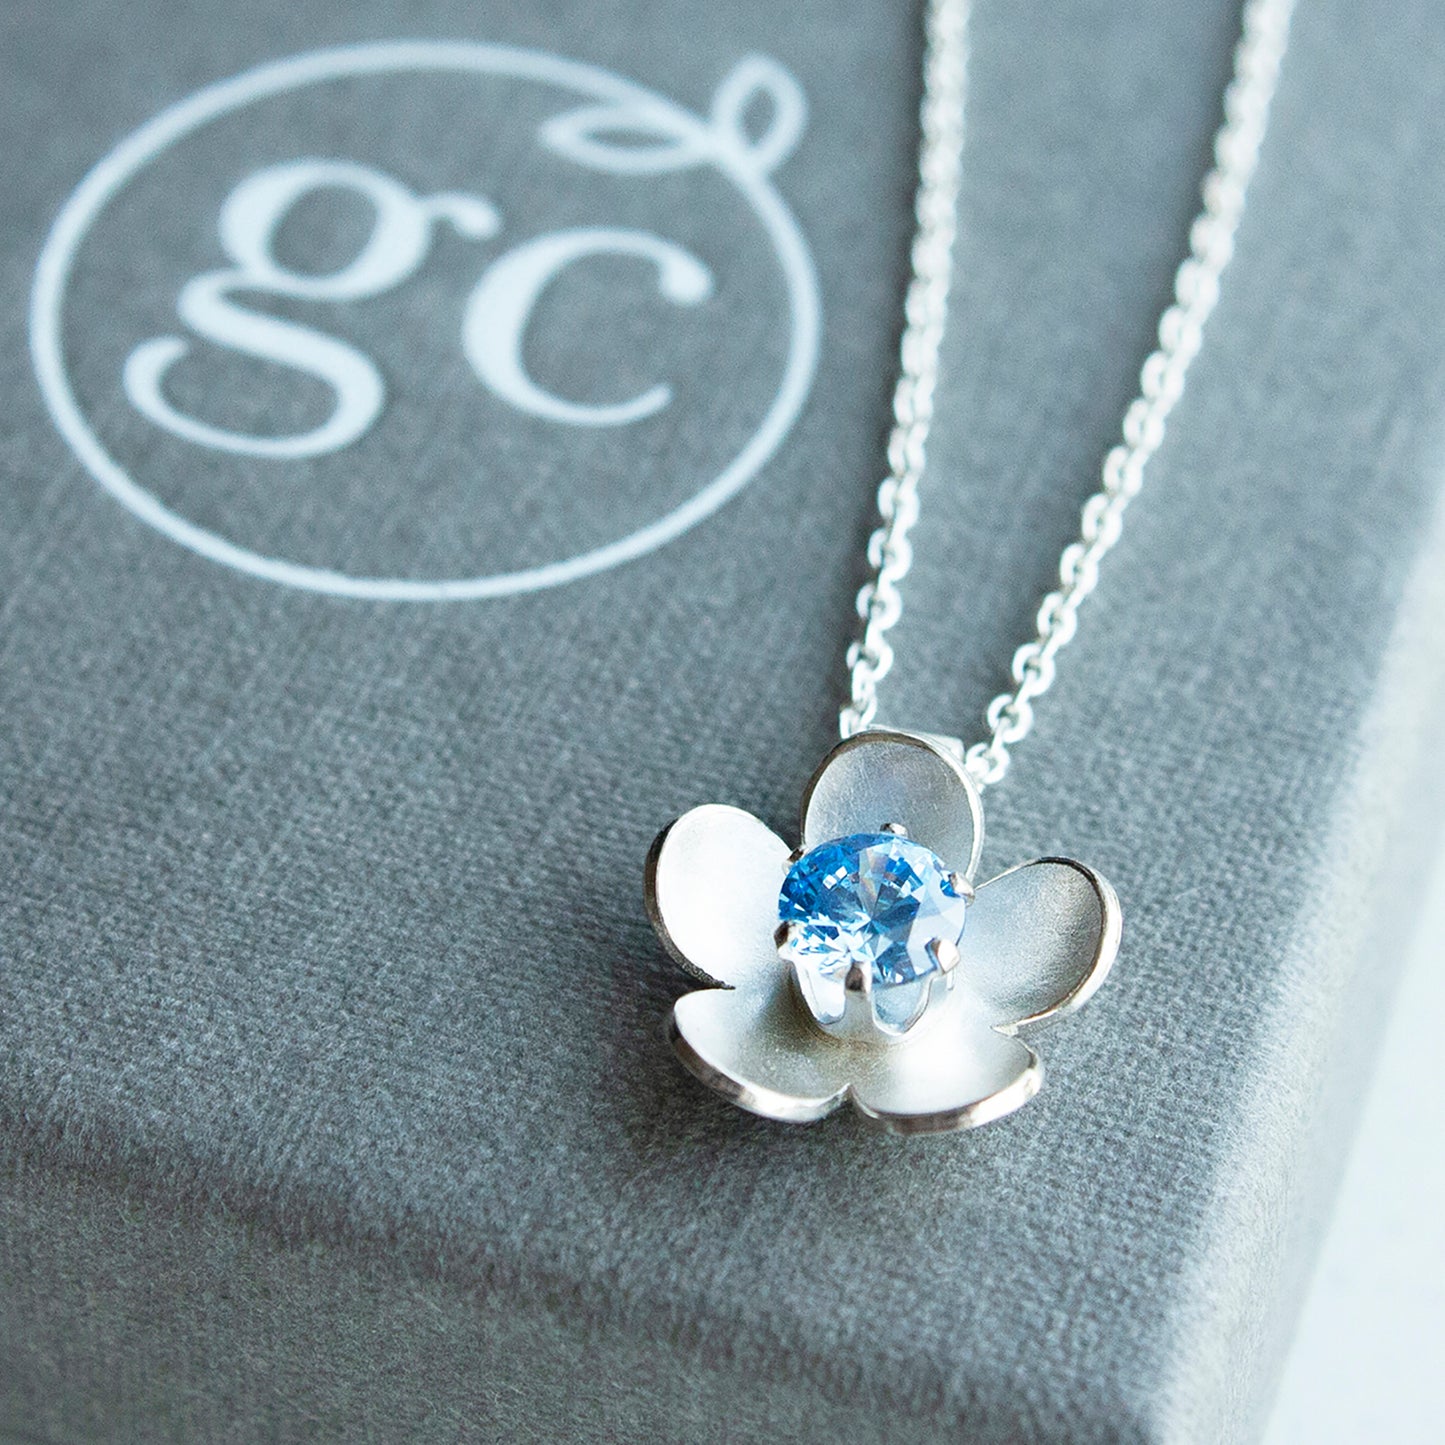 Silver blossom flower necklace with choice of birthstone